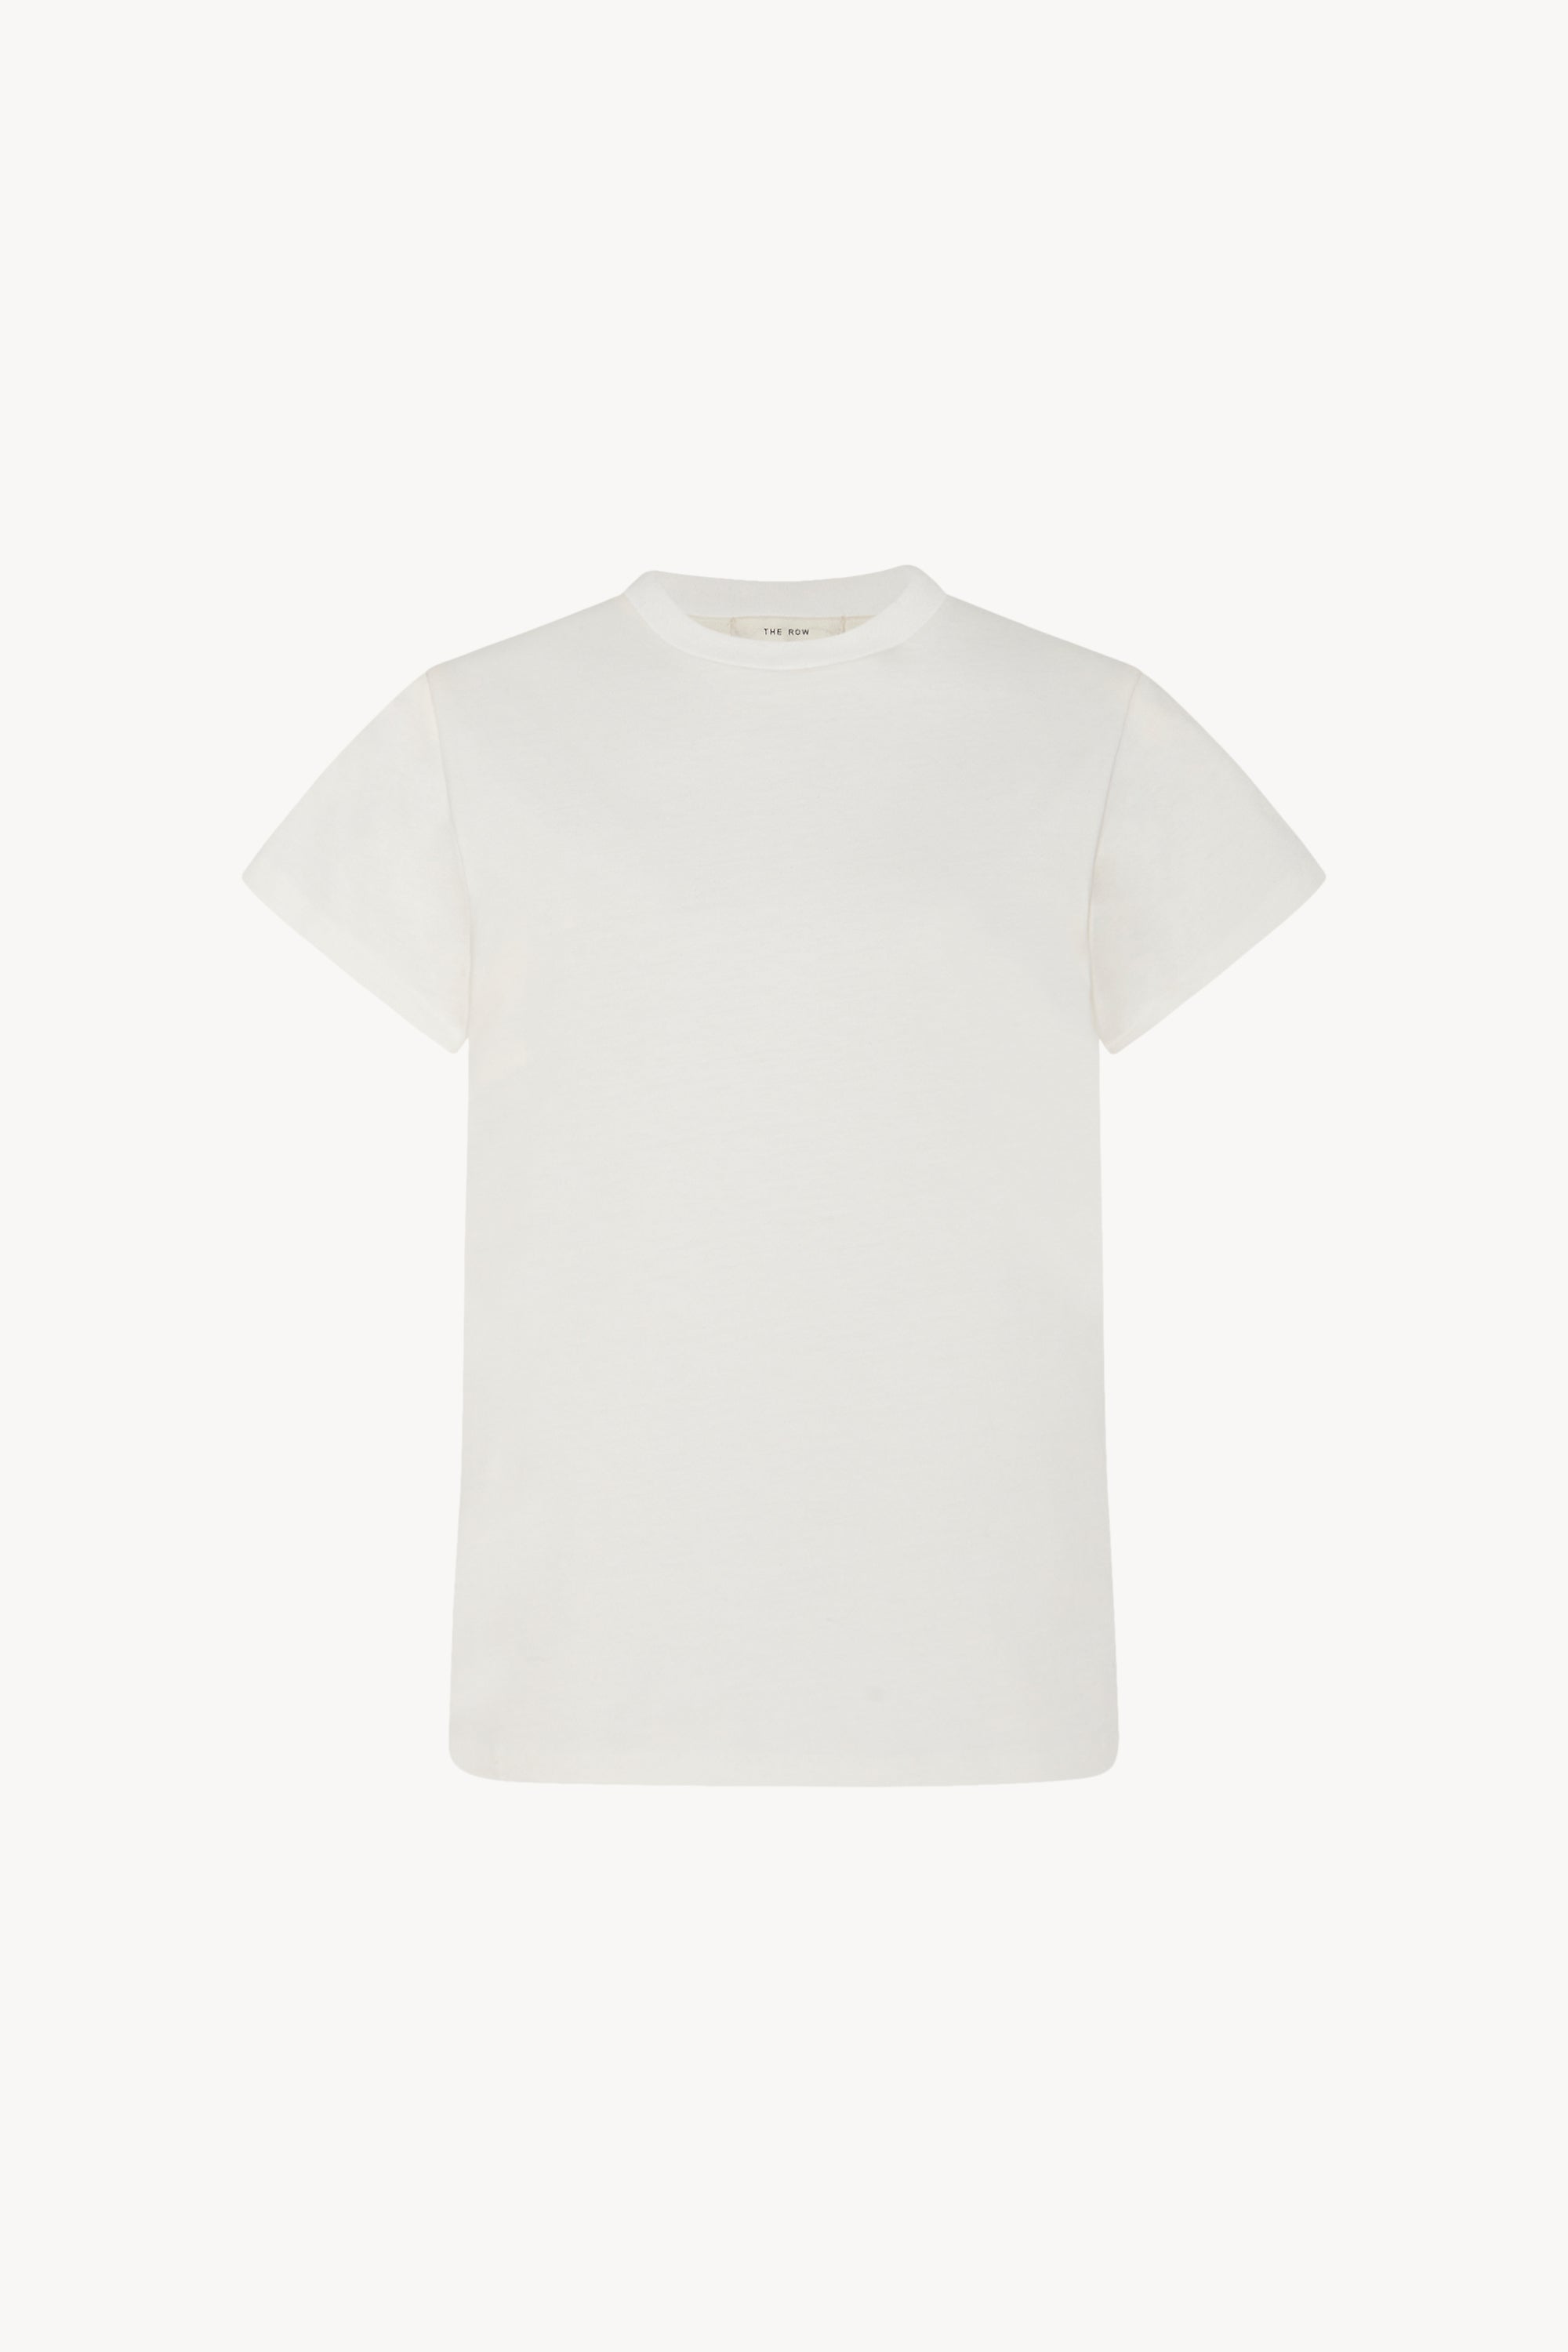 Charo Top White in Cotton – The Row